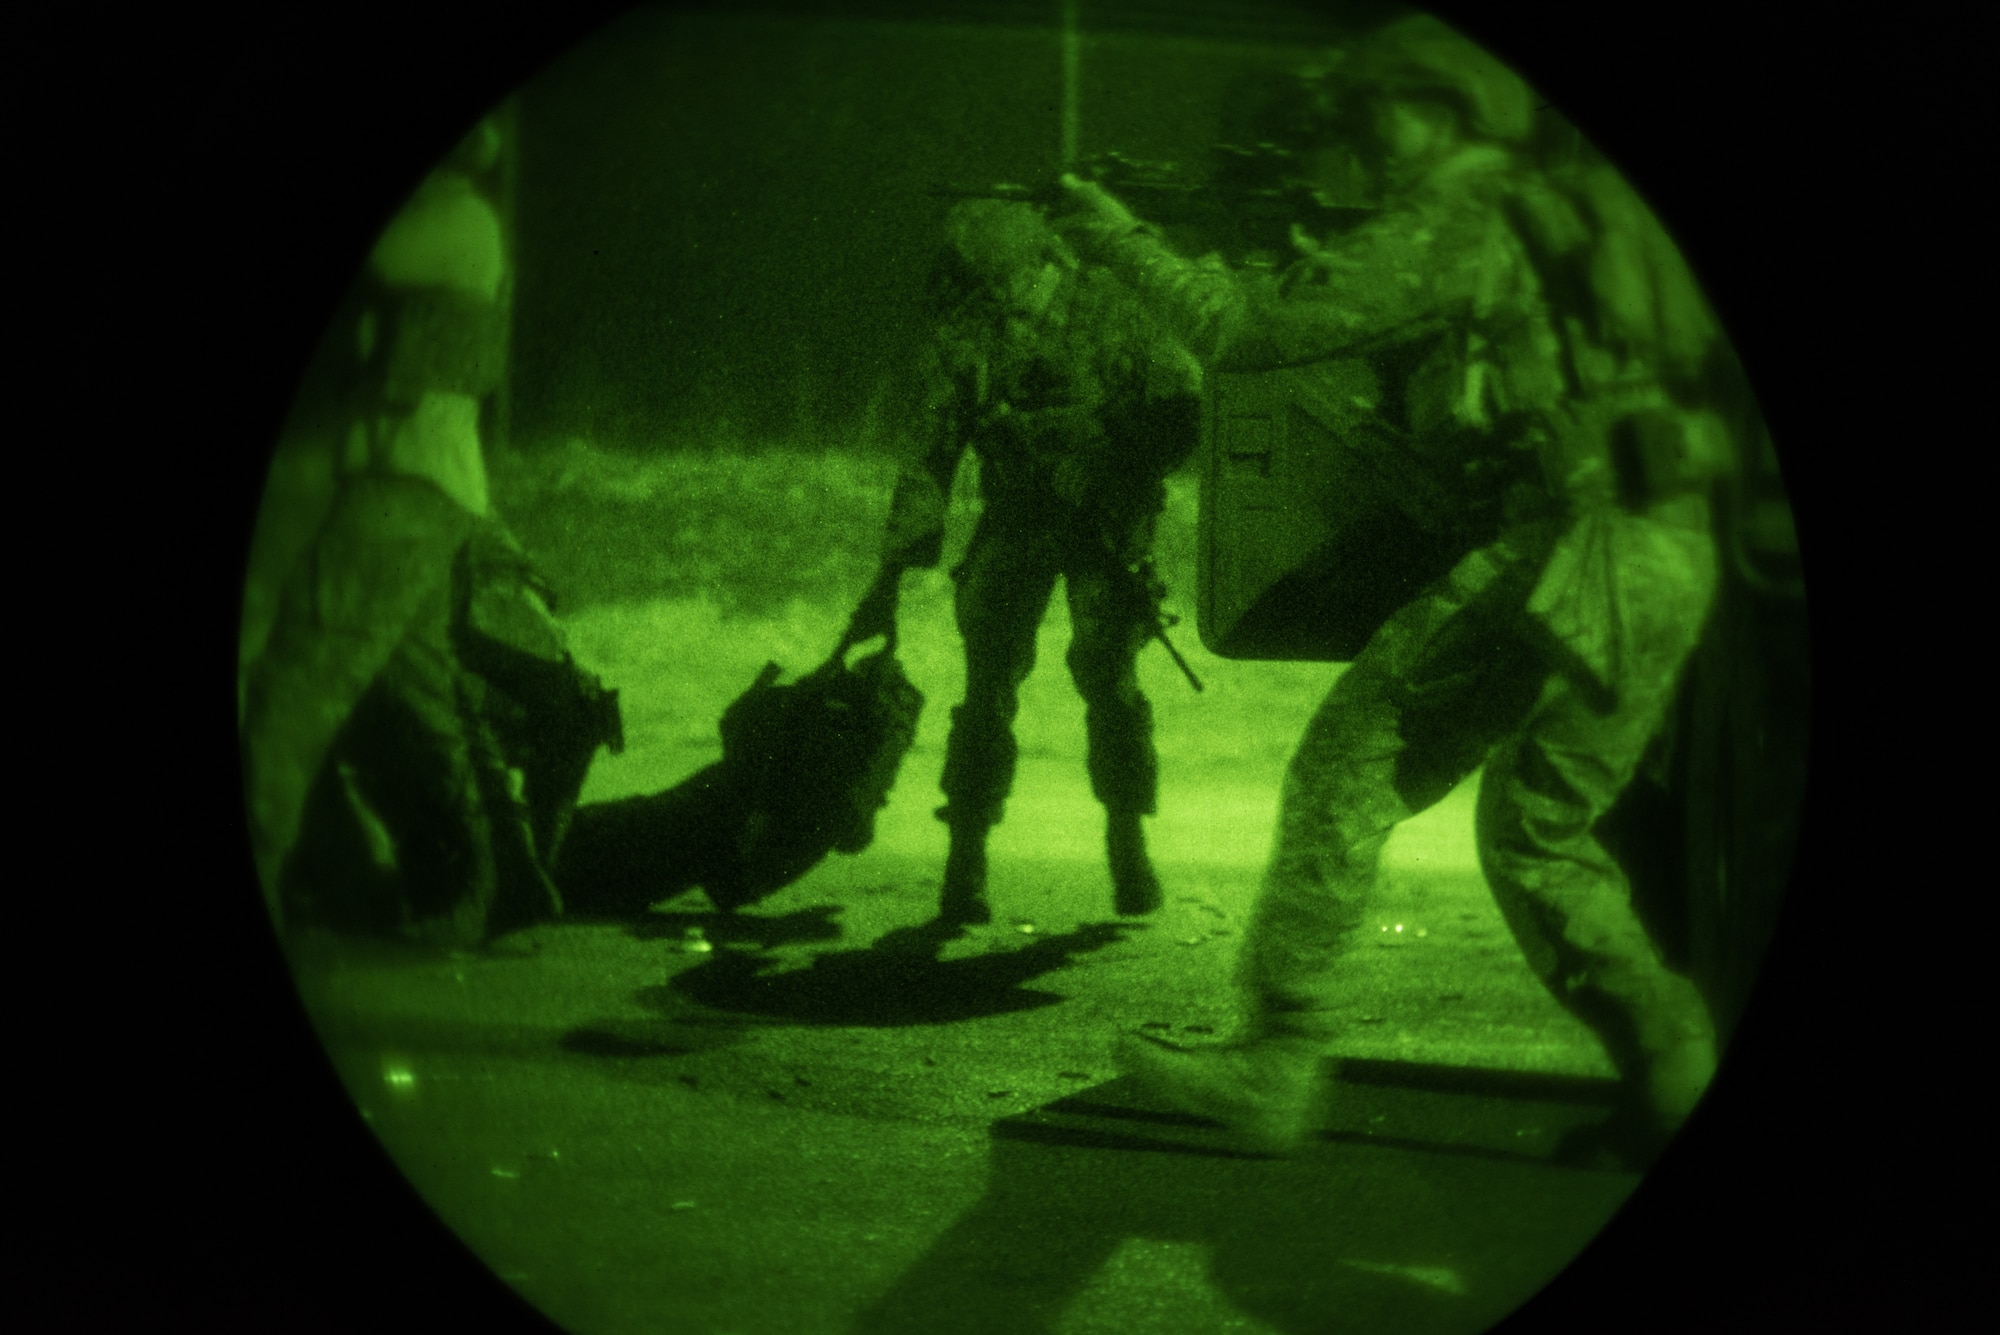 U.S. Airmen from the 148th Air Support Operations Squadron perform a casualty evacuation drill during night-time training